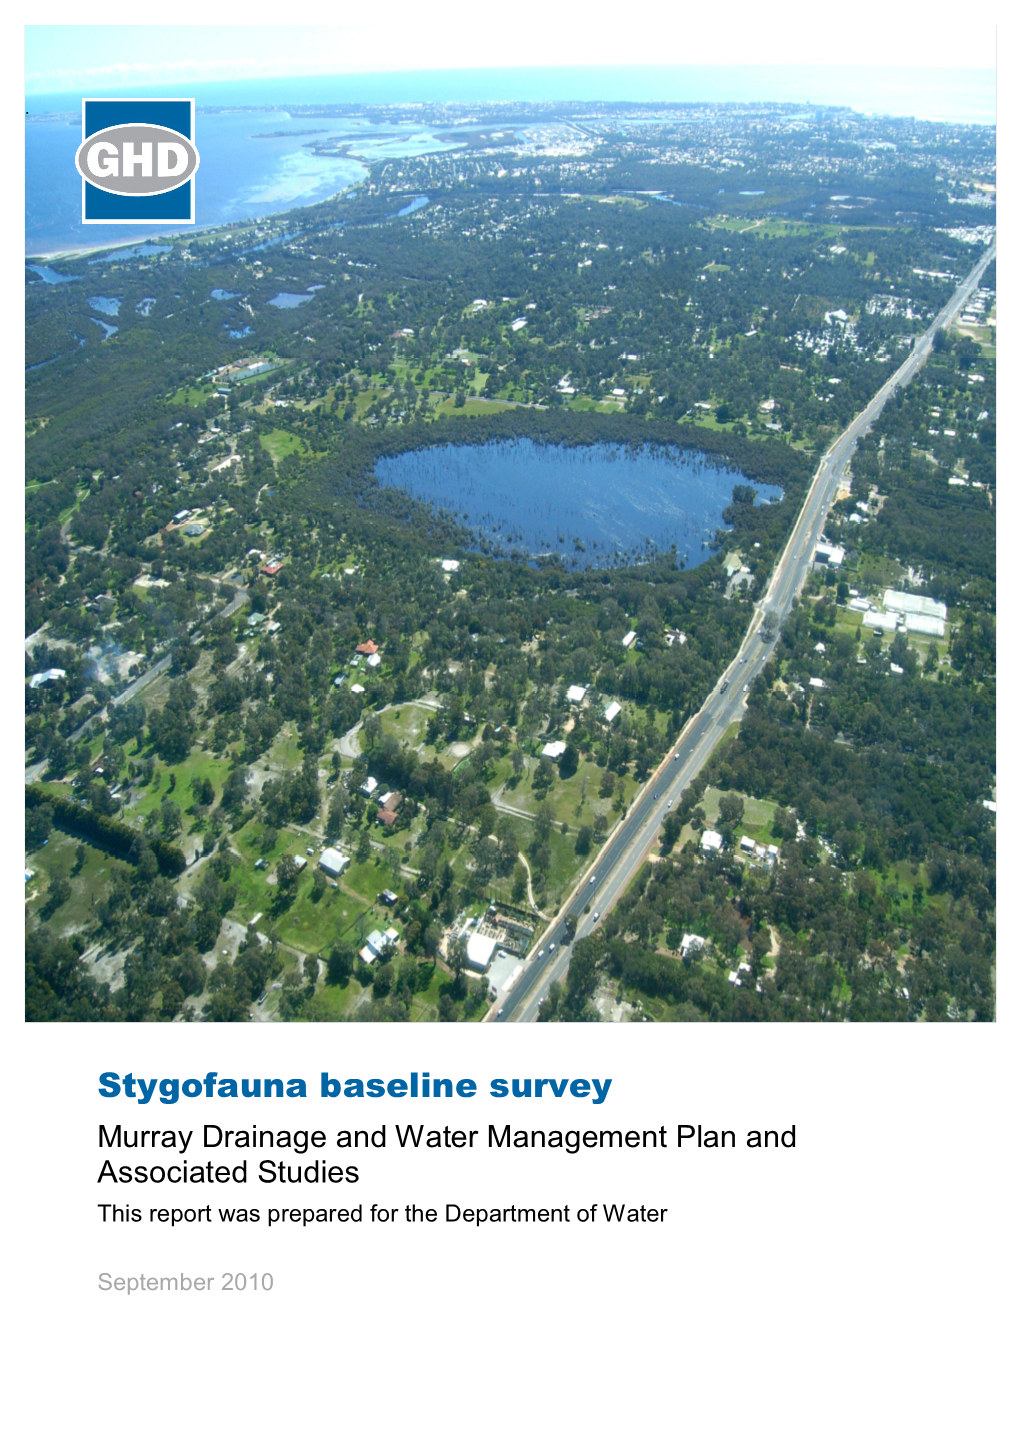 Stygofauna Baseline Survey Murray Drainage and Water Management Plan and Associated Studies This Report Was Prepared for the Department of Water